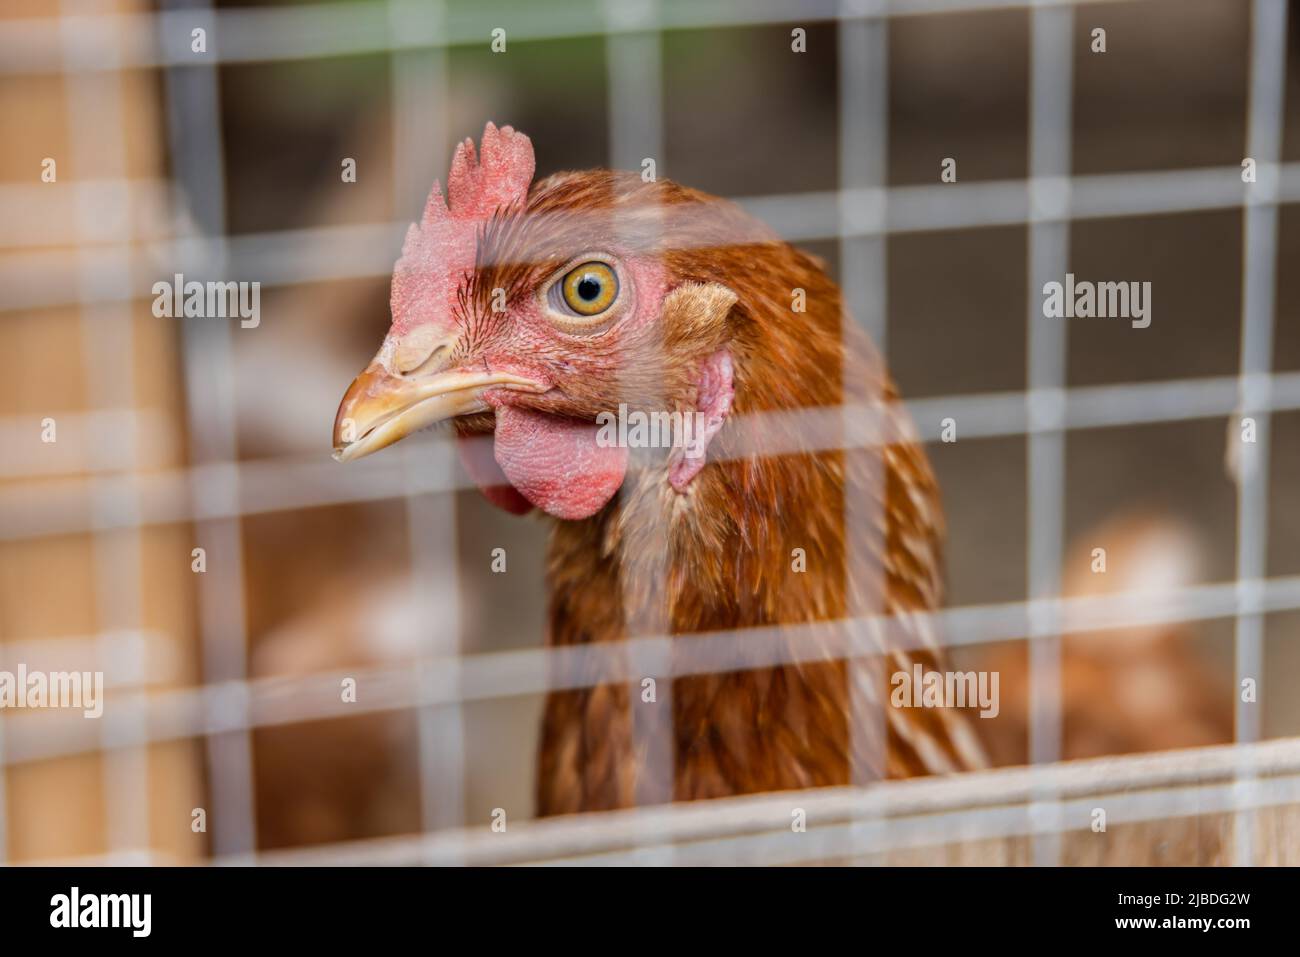 Selective focus headshot of an ISA Brown chicken looking through mesh of a hen coop, seen blurred in foreground. Profile with beak, comb and eye. Stock Photo